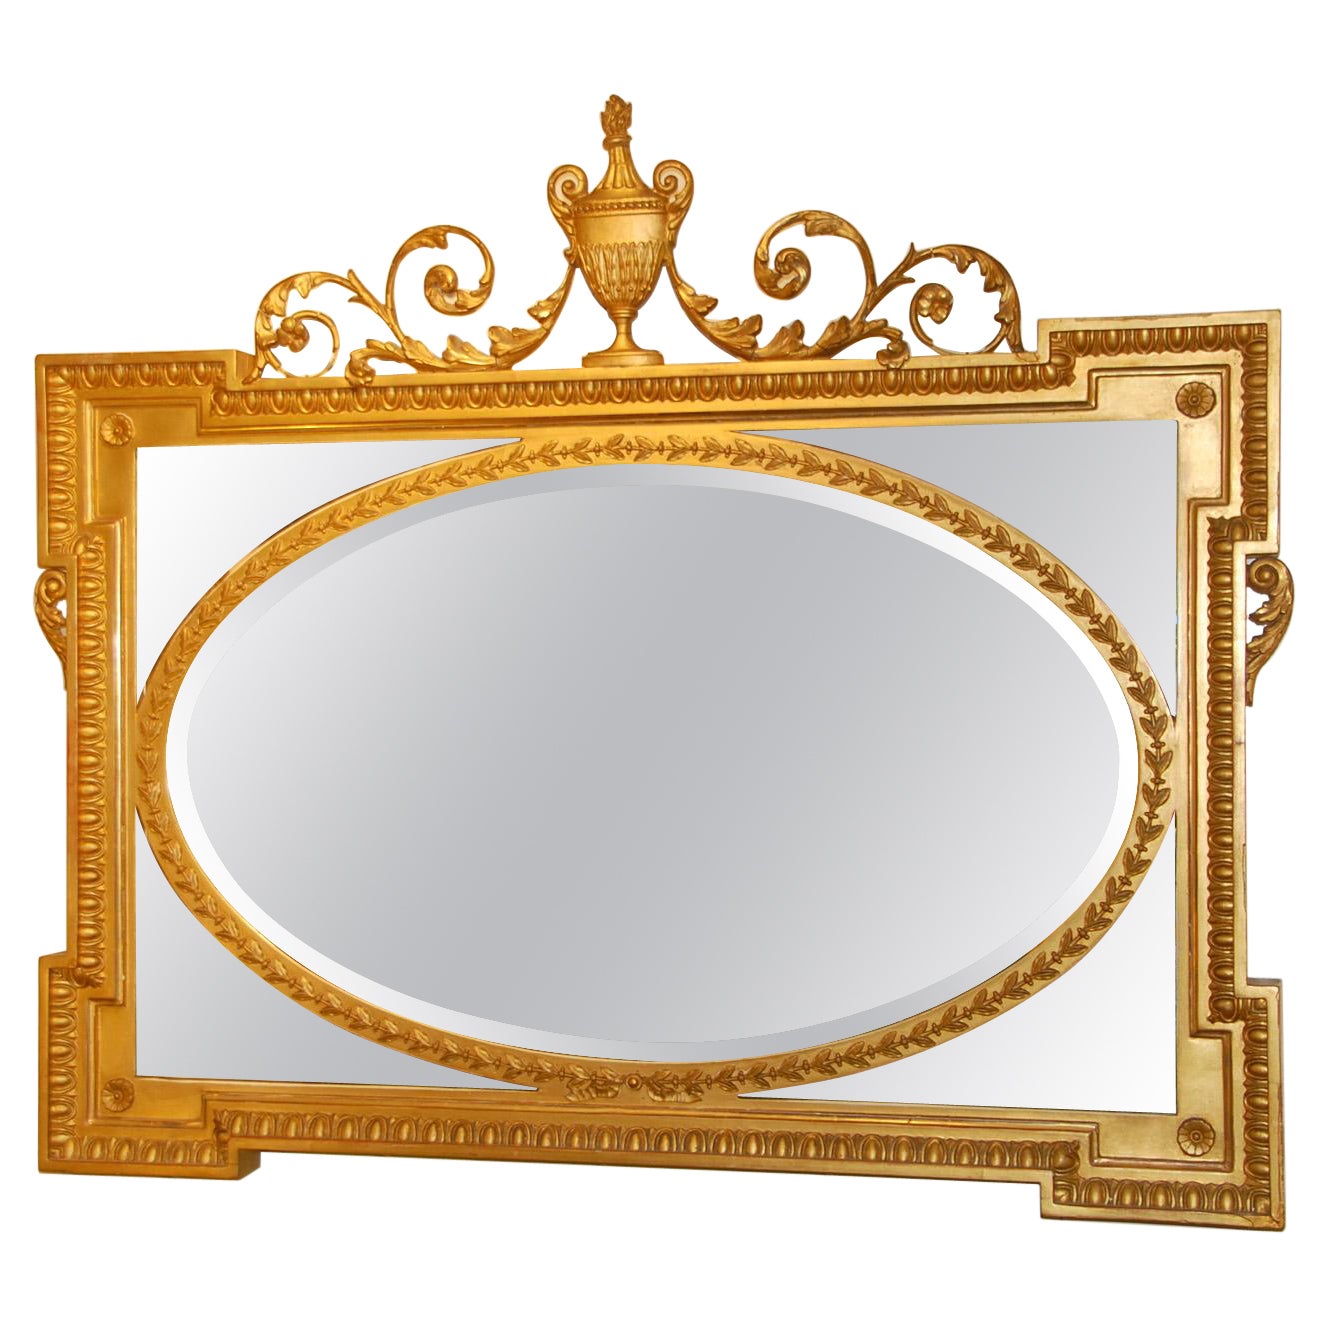 English Edwardian Gold Mirror with Urn and Trailing Leaves Surmounting the Frame